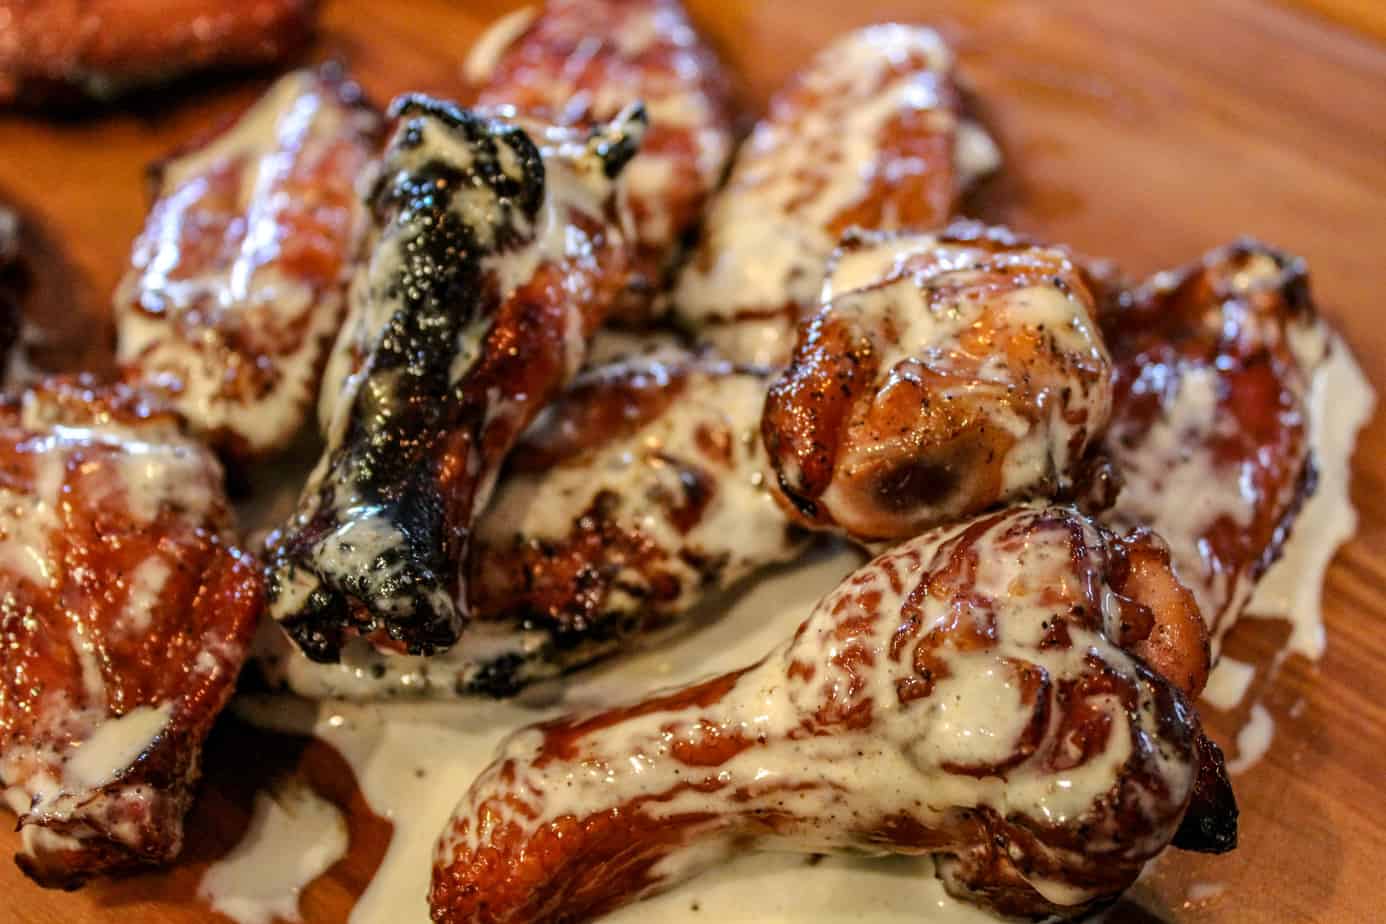 Chicken Wings tossed in white bbq sauce